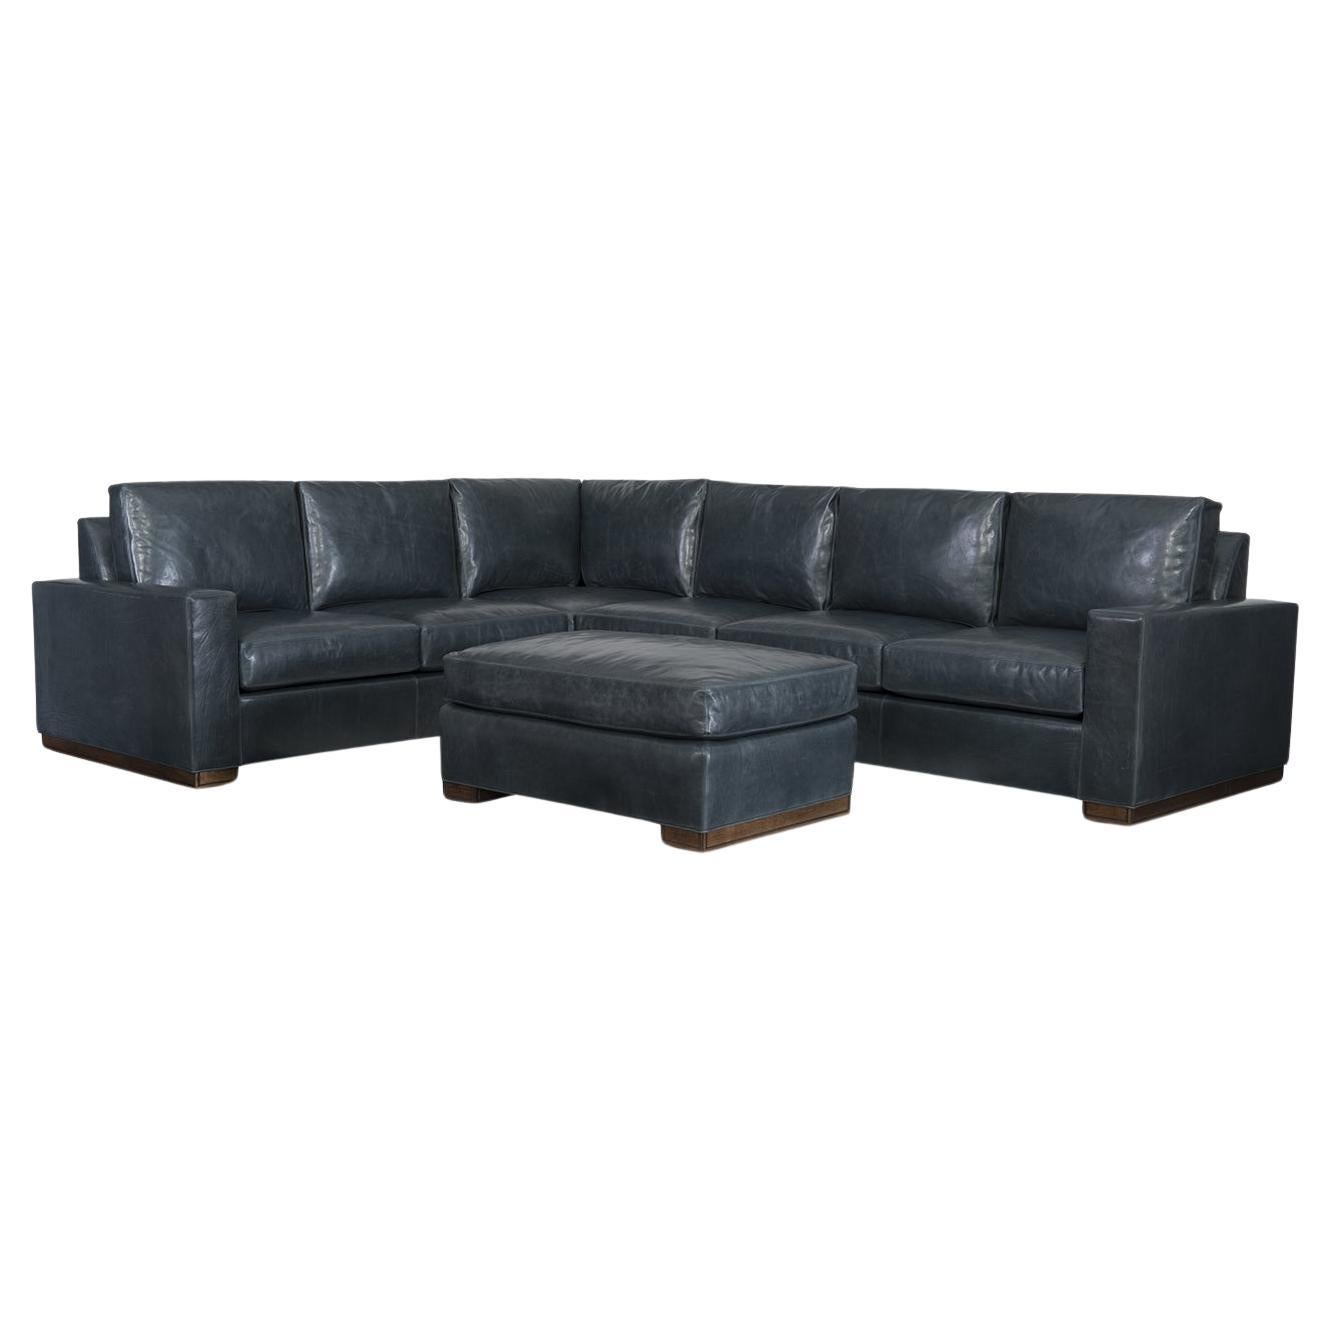 Ample Custom Sectional Sofa For Sale